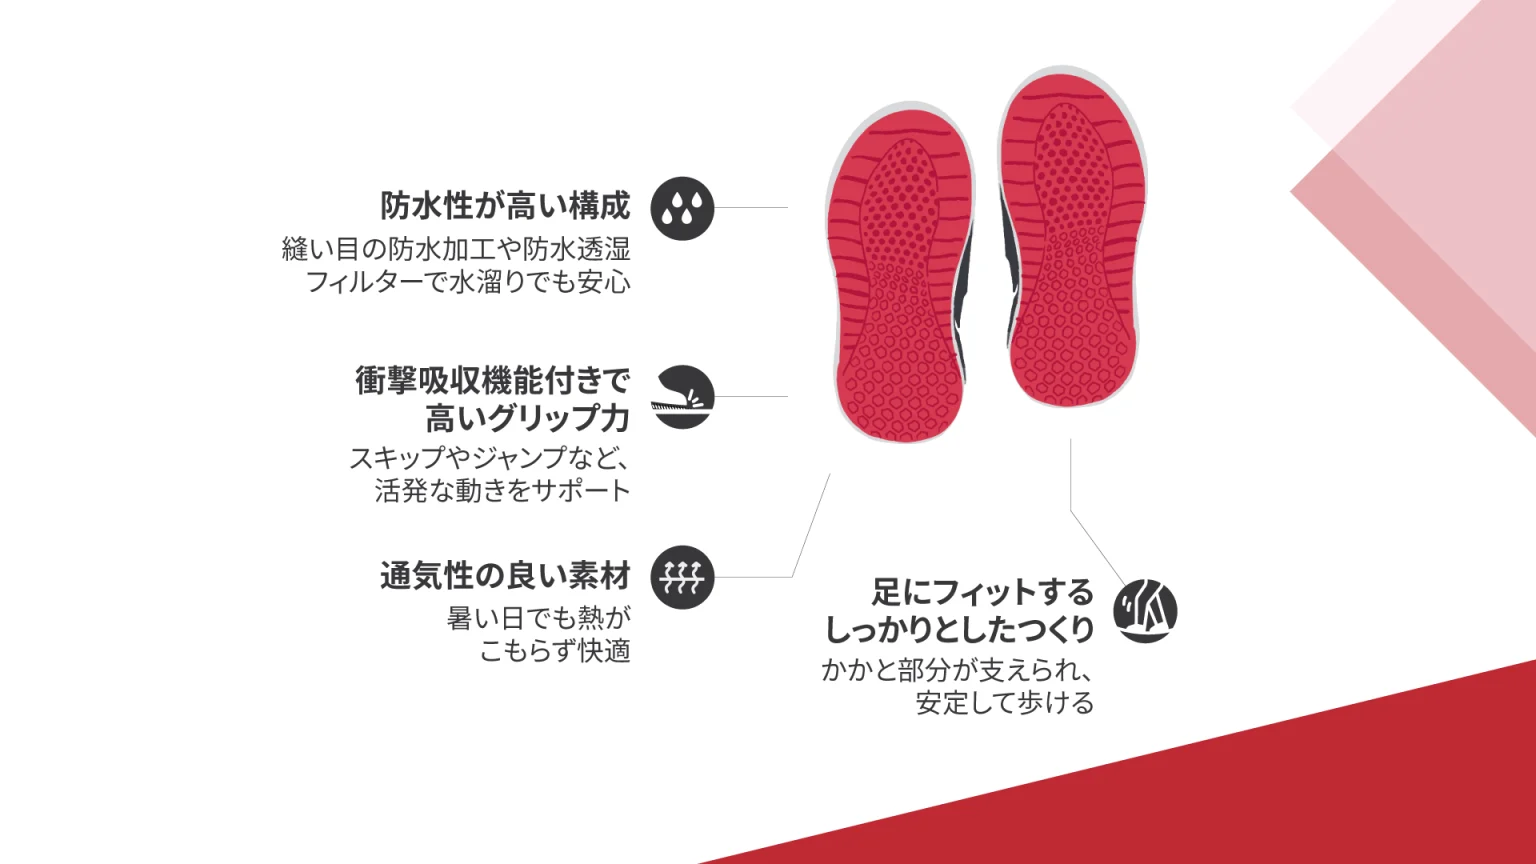 2310-reima_how-to-choose-footwear-infographic-v3B.png